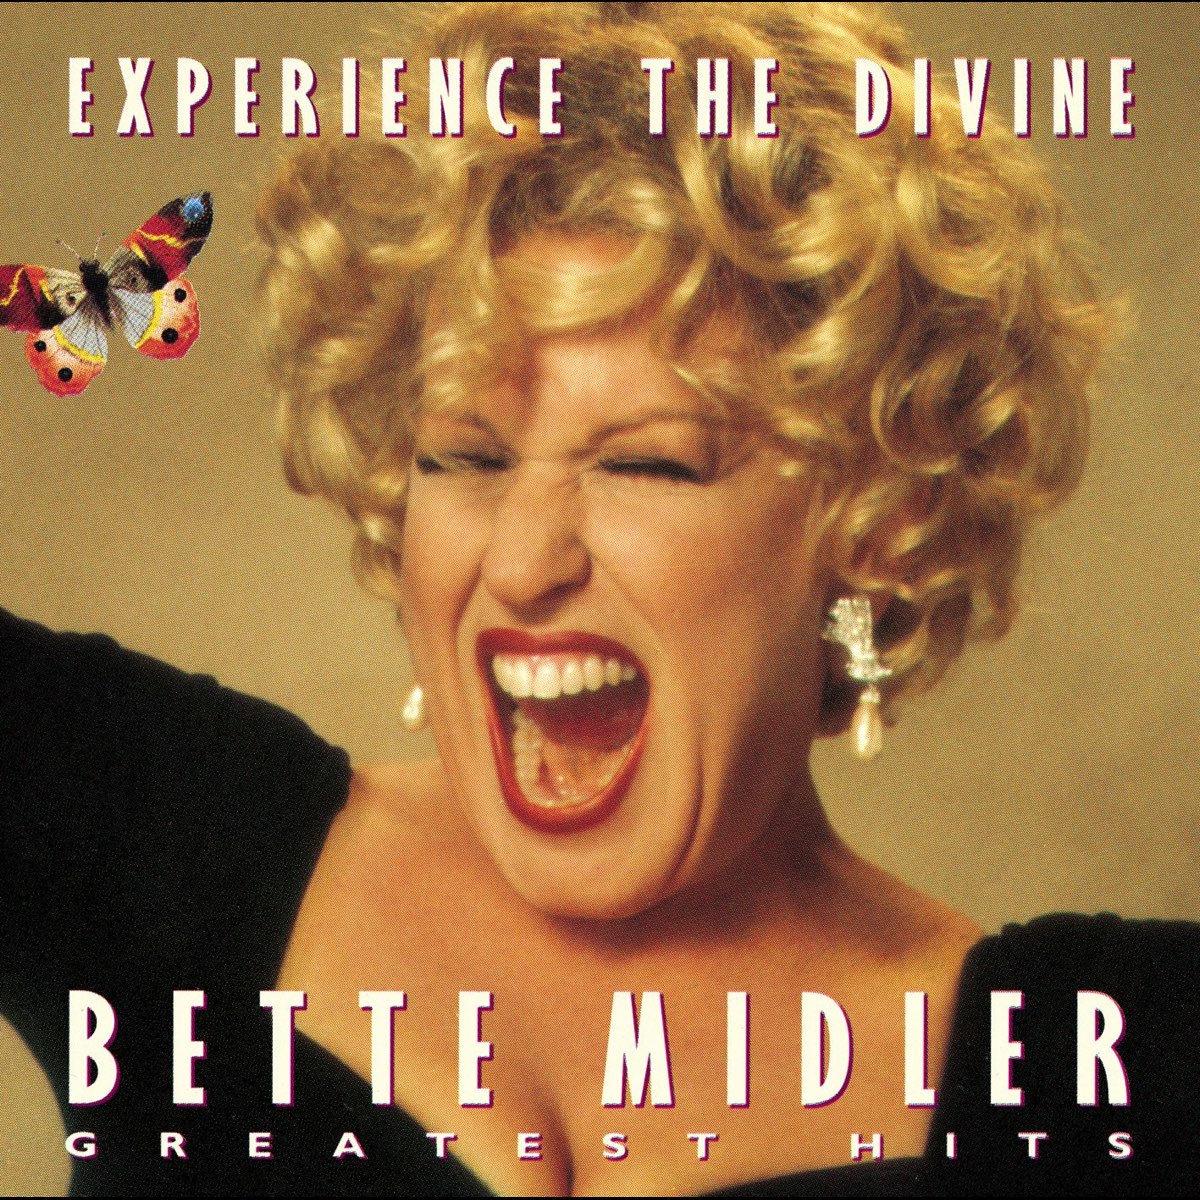 bette midler experience the divine tour